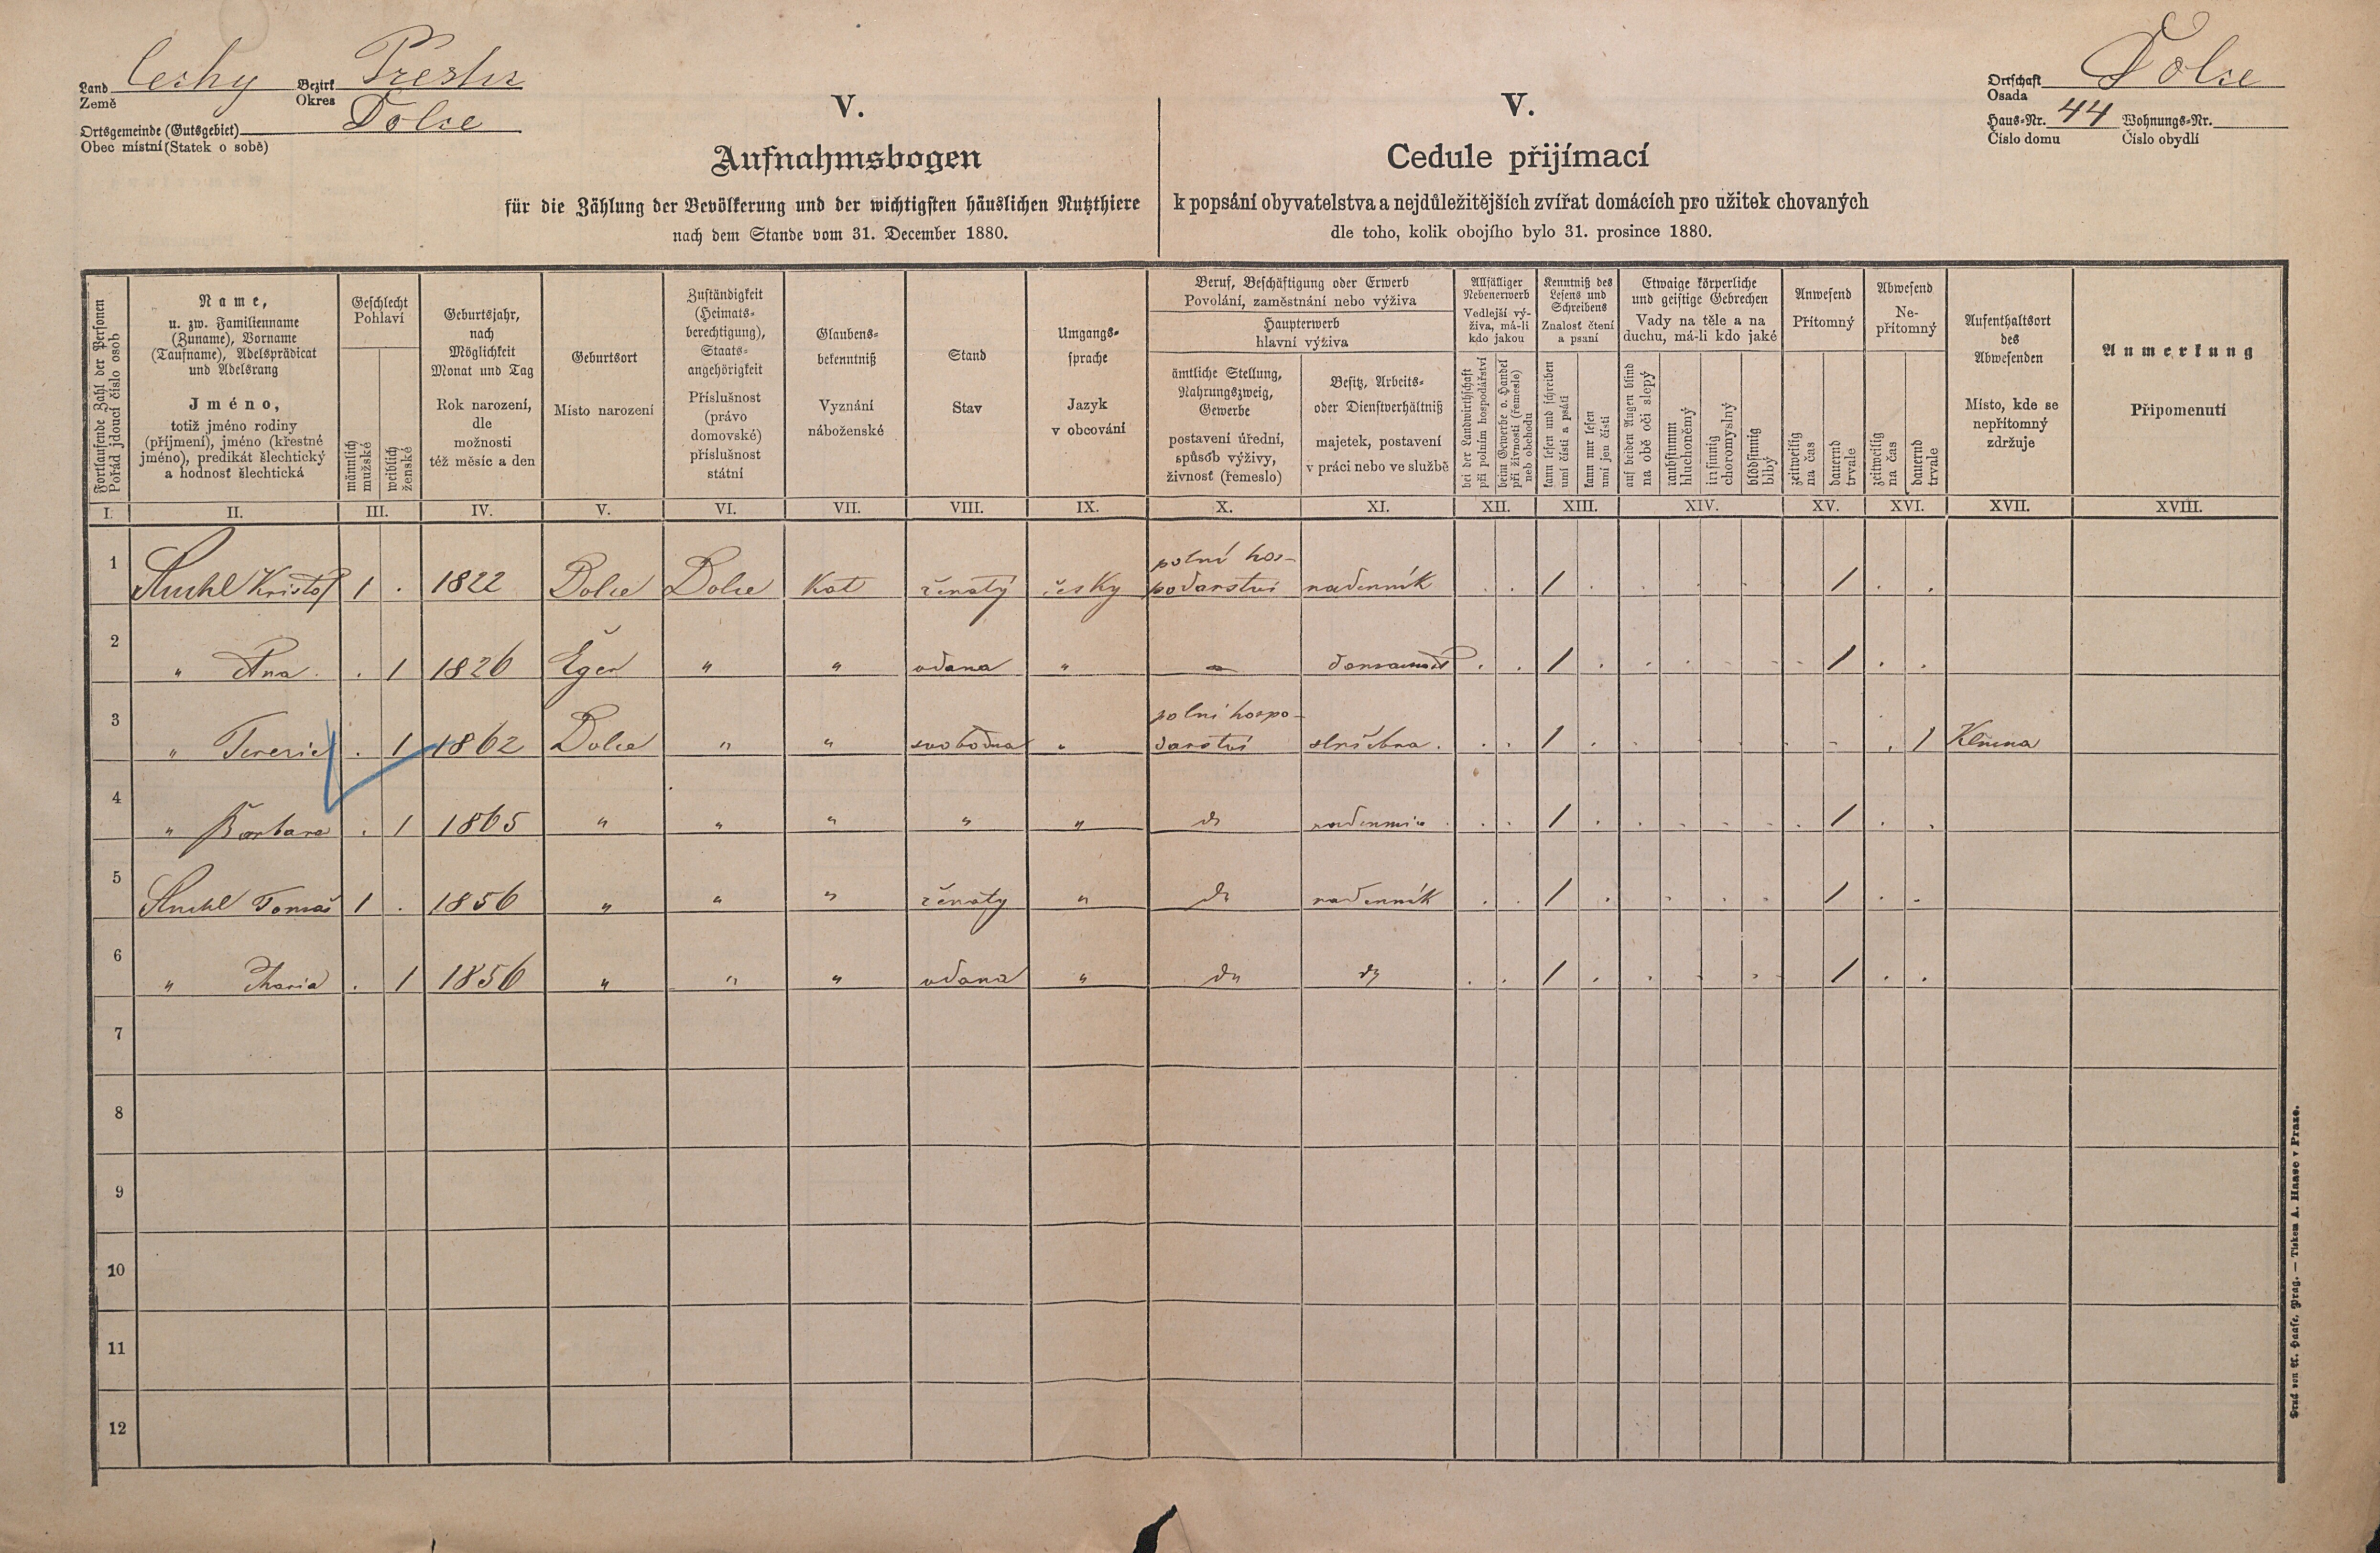 1. soap-pj_00302_census-1880-dolce-cp044_0010